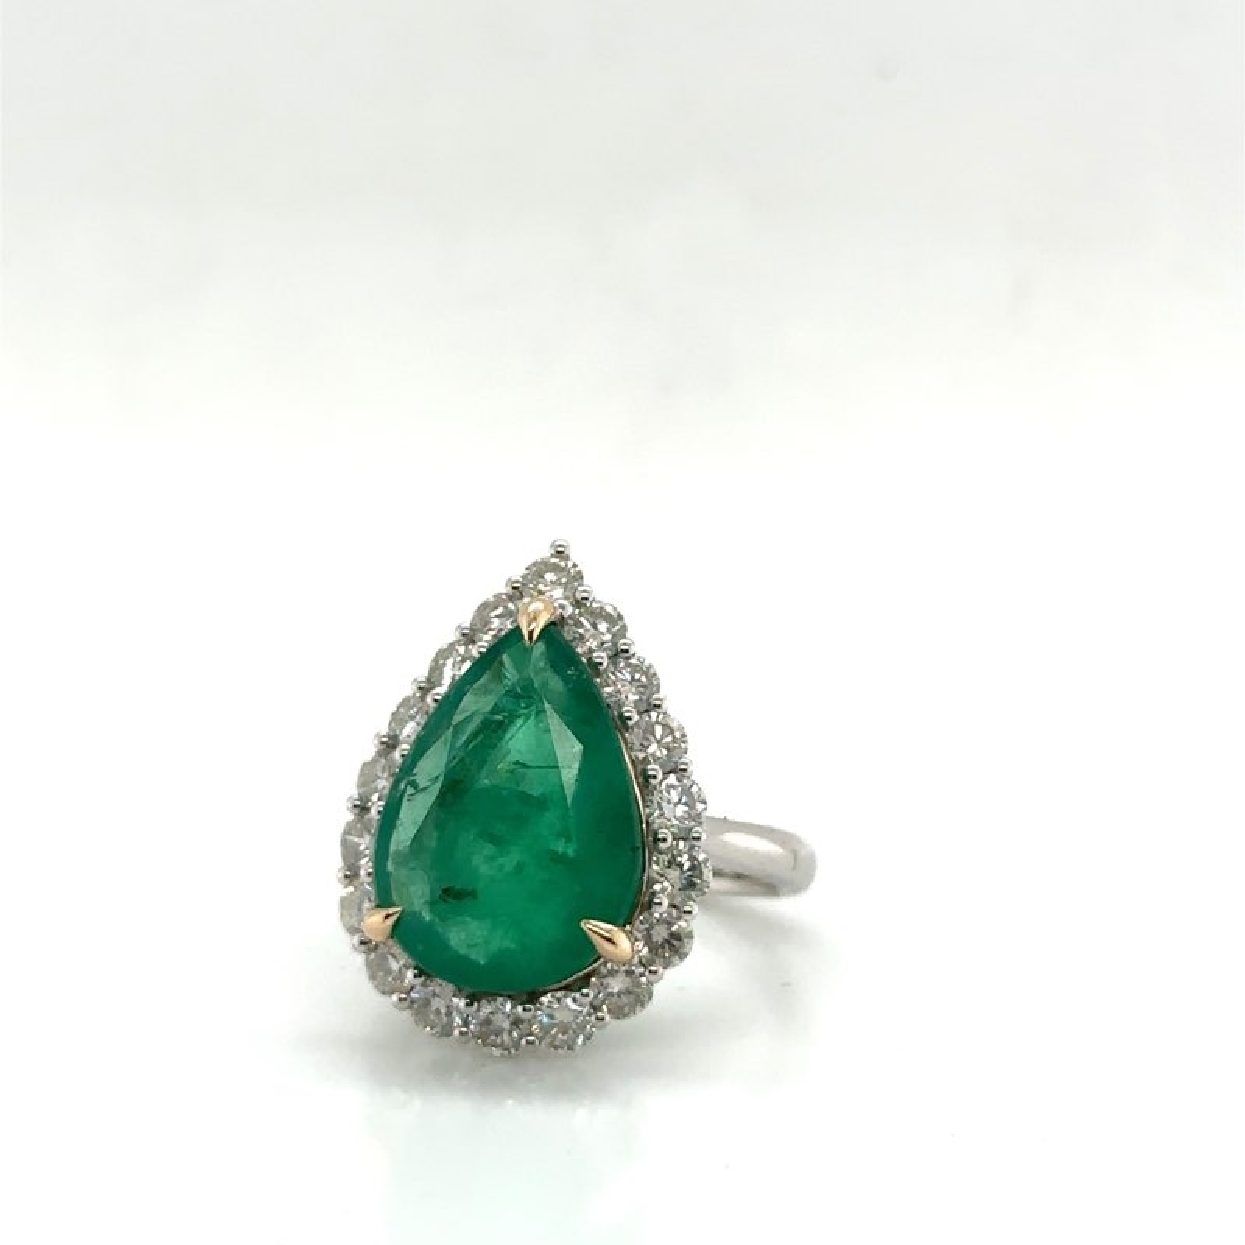 14K White and Yellow Gold Ring with a 6.49 ct Pear Cut Emerald and 1.42 ct Diamond Halo 
Size 7